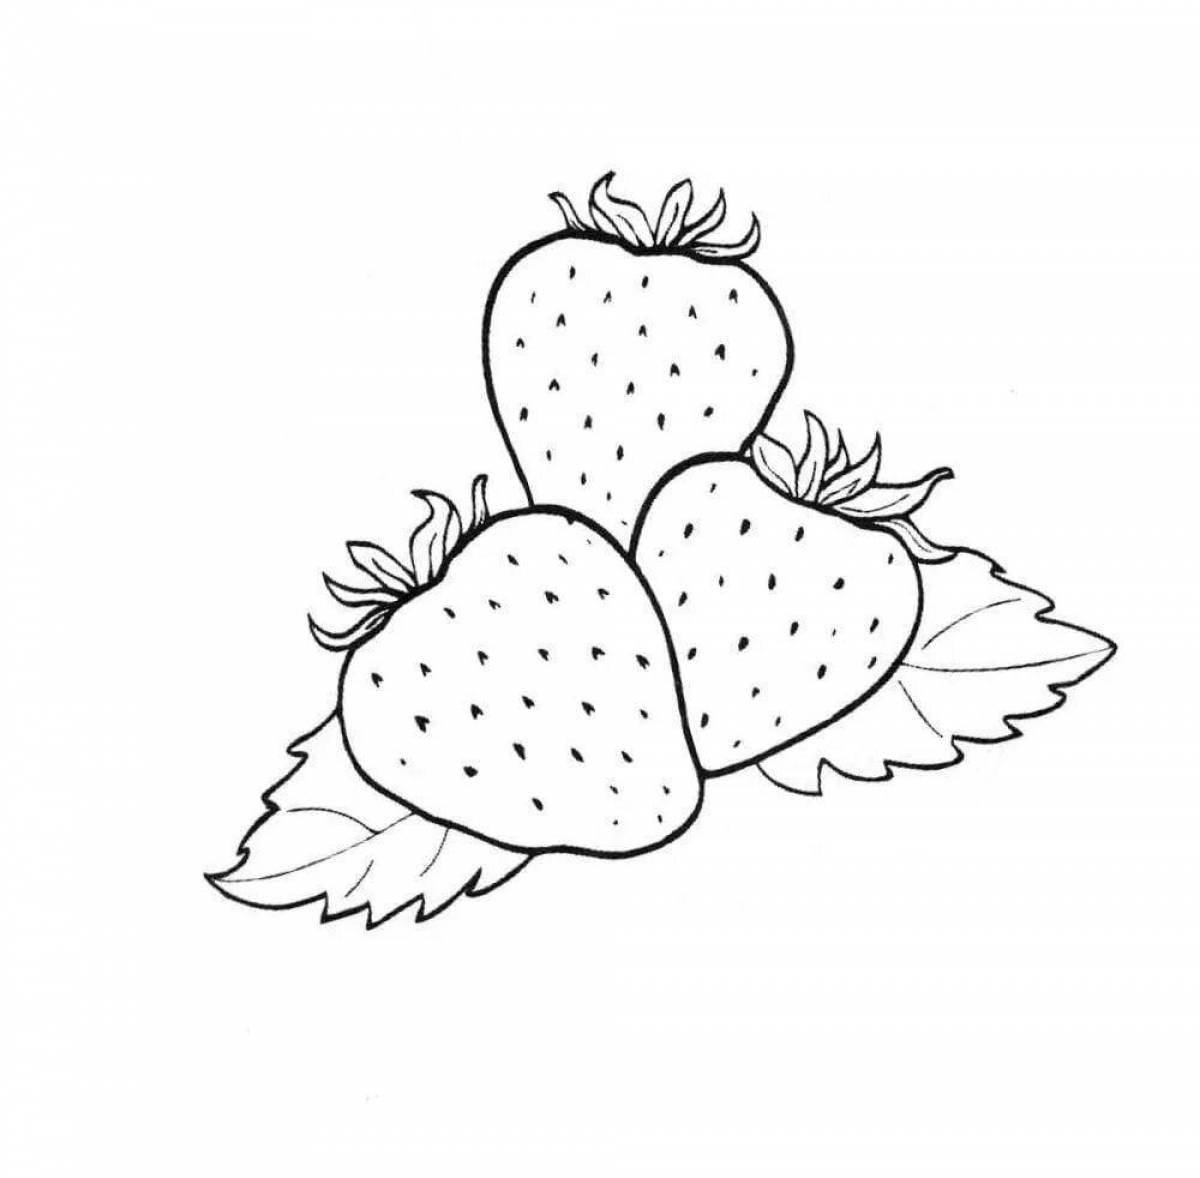 Many berries coloring pages